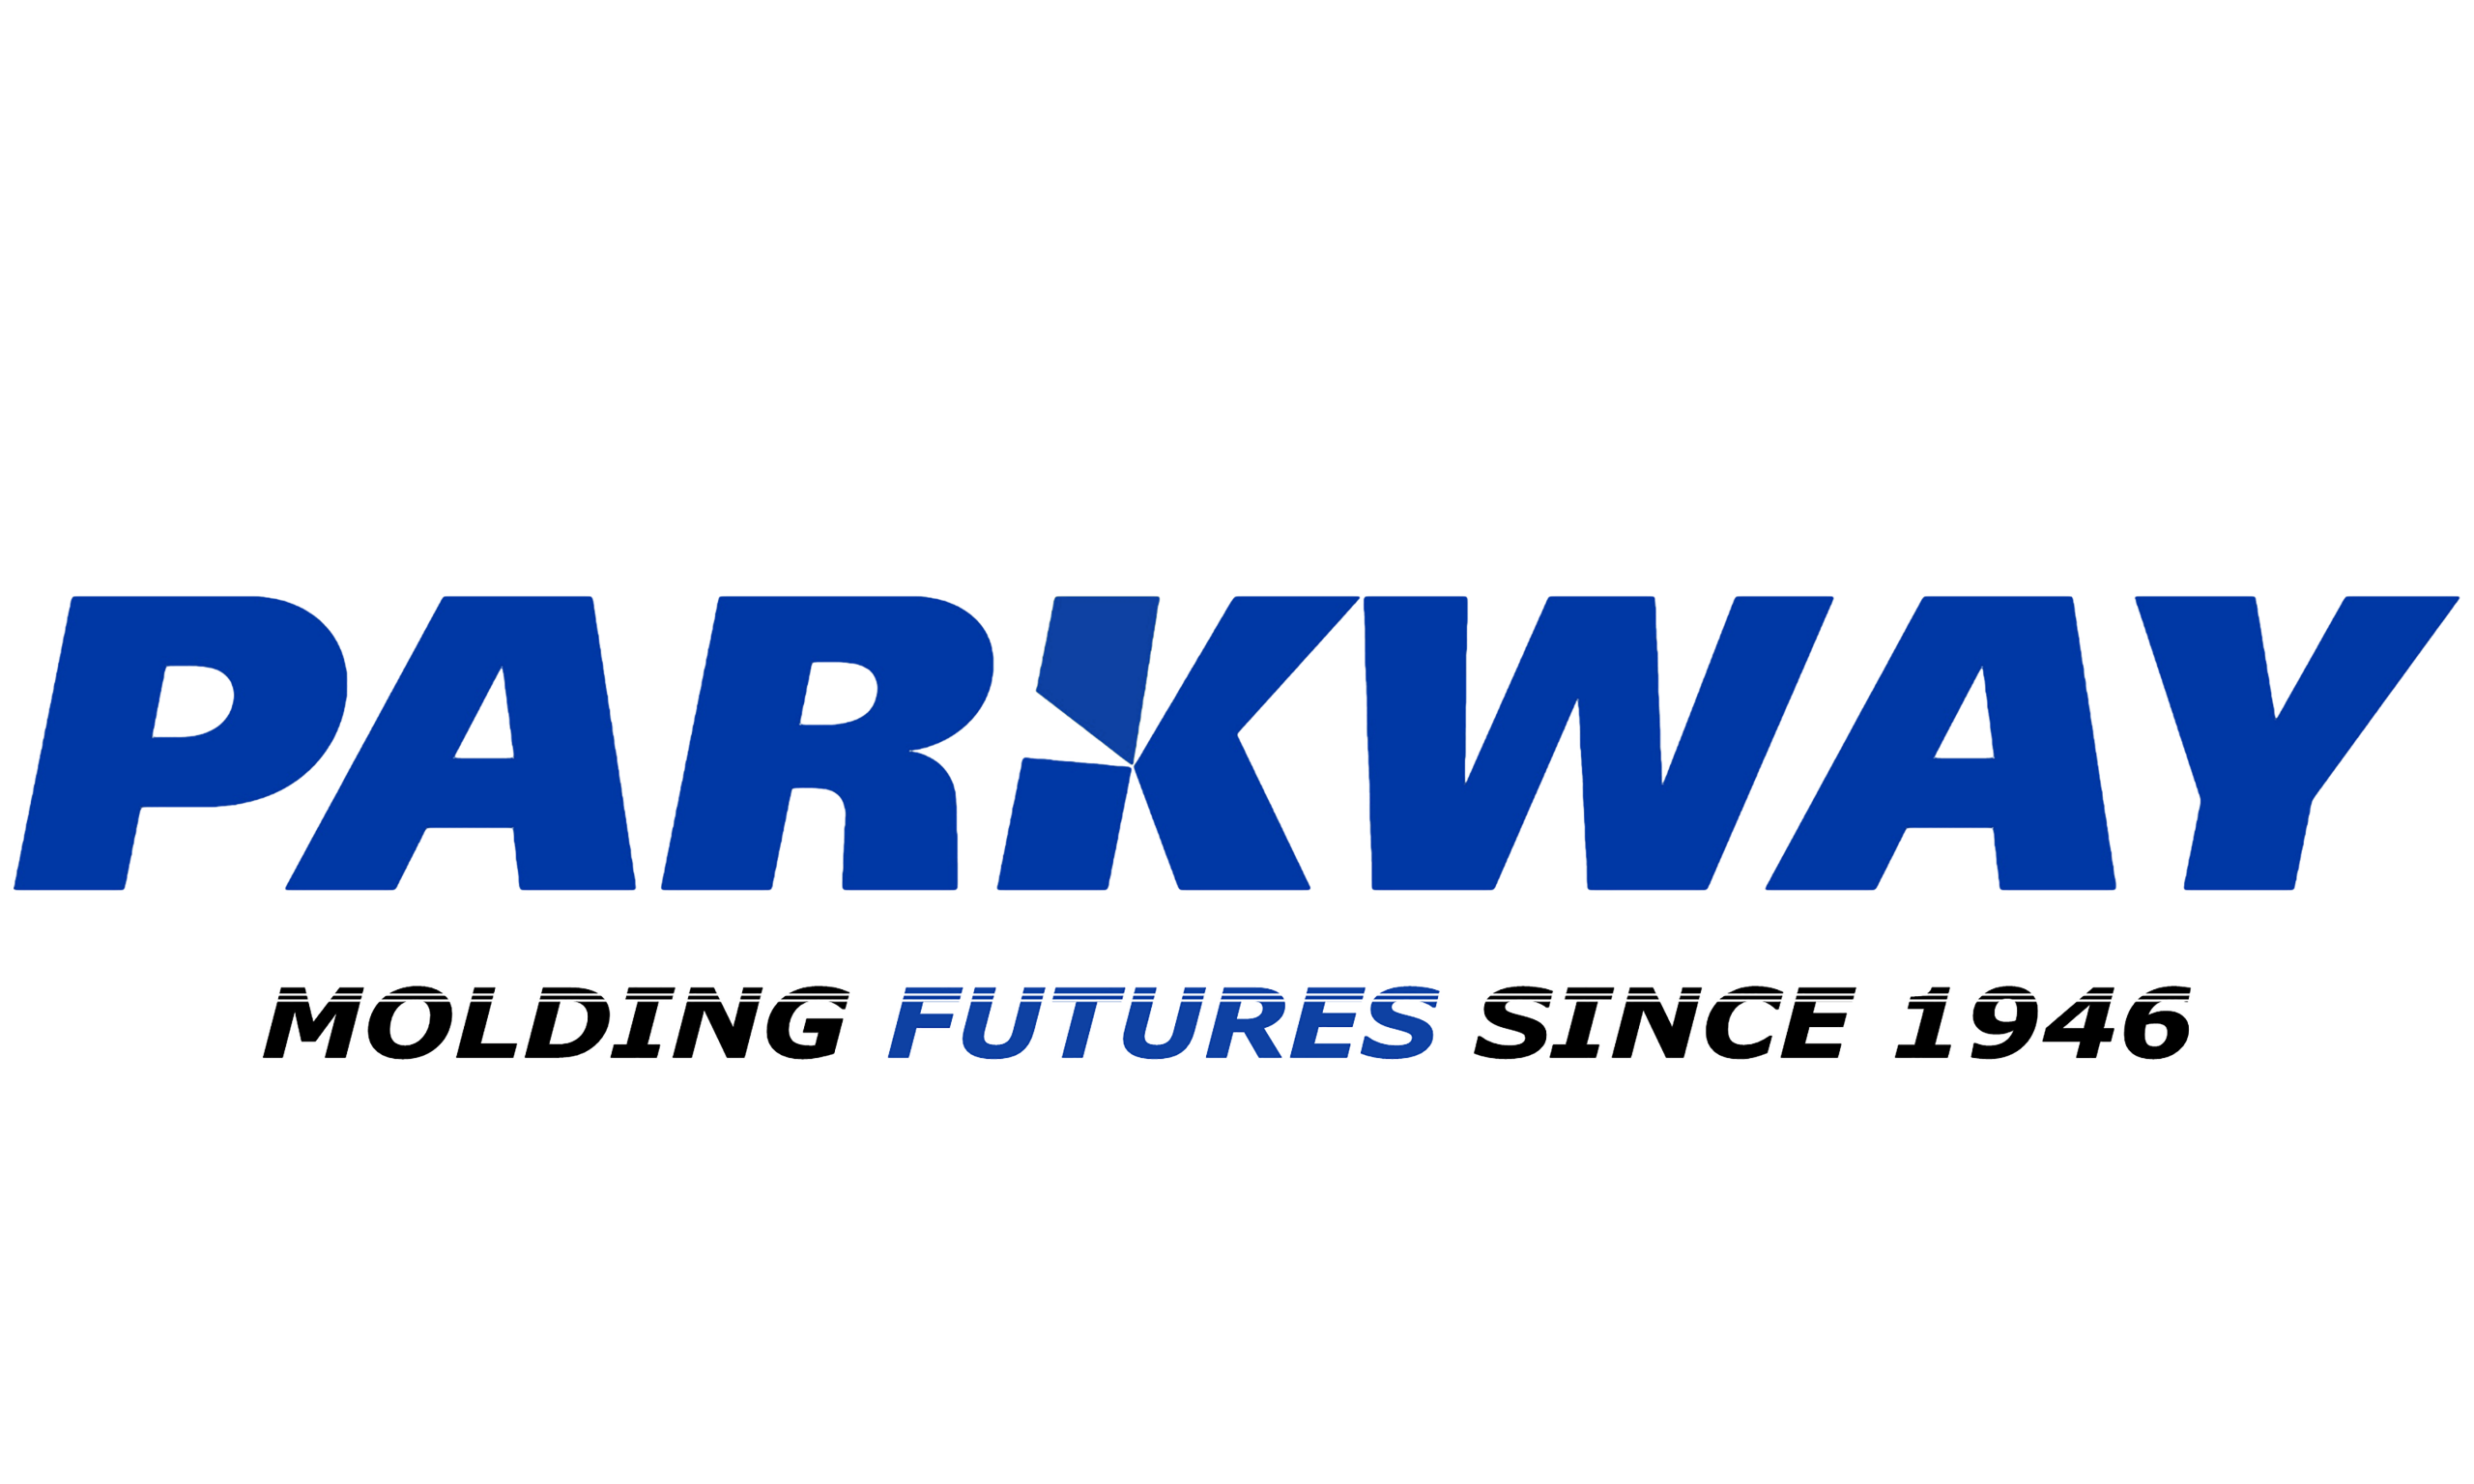 Parkway Products logo since 1946